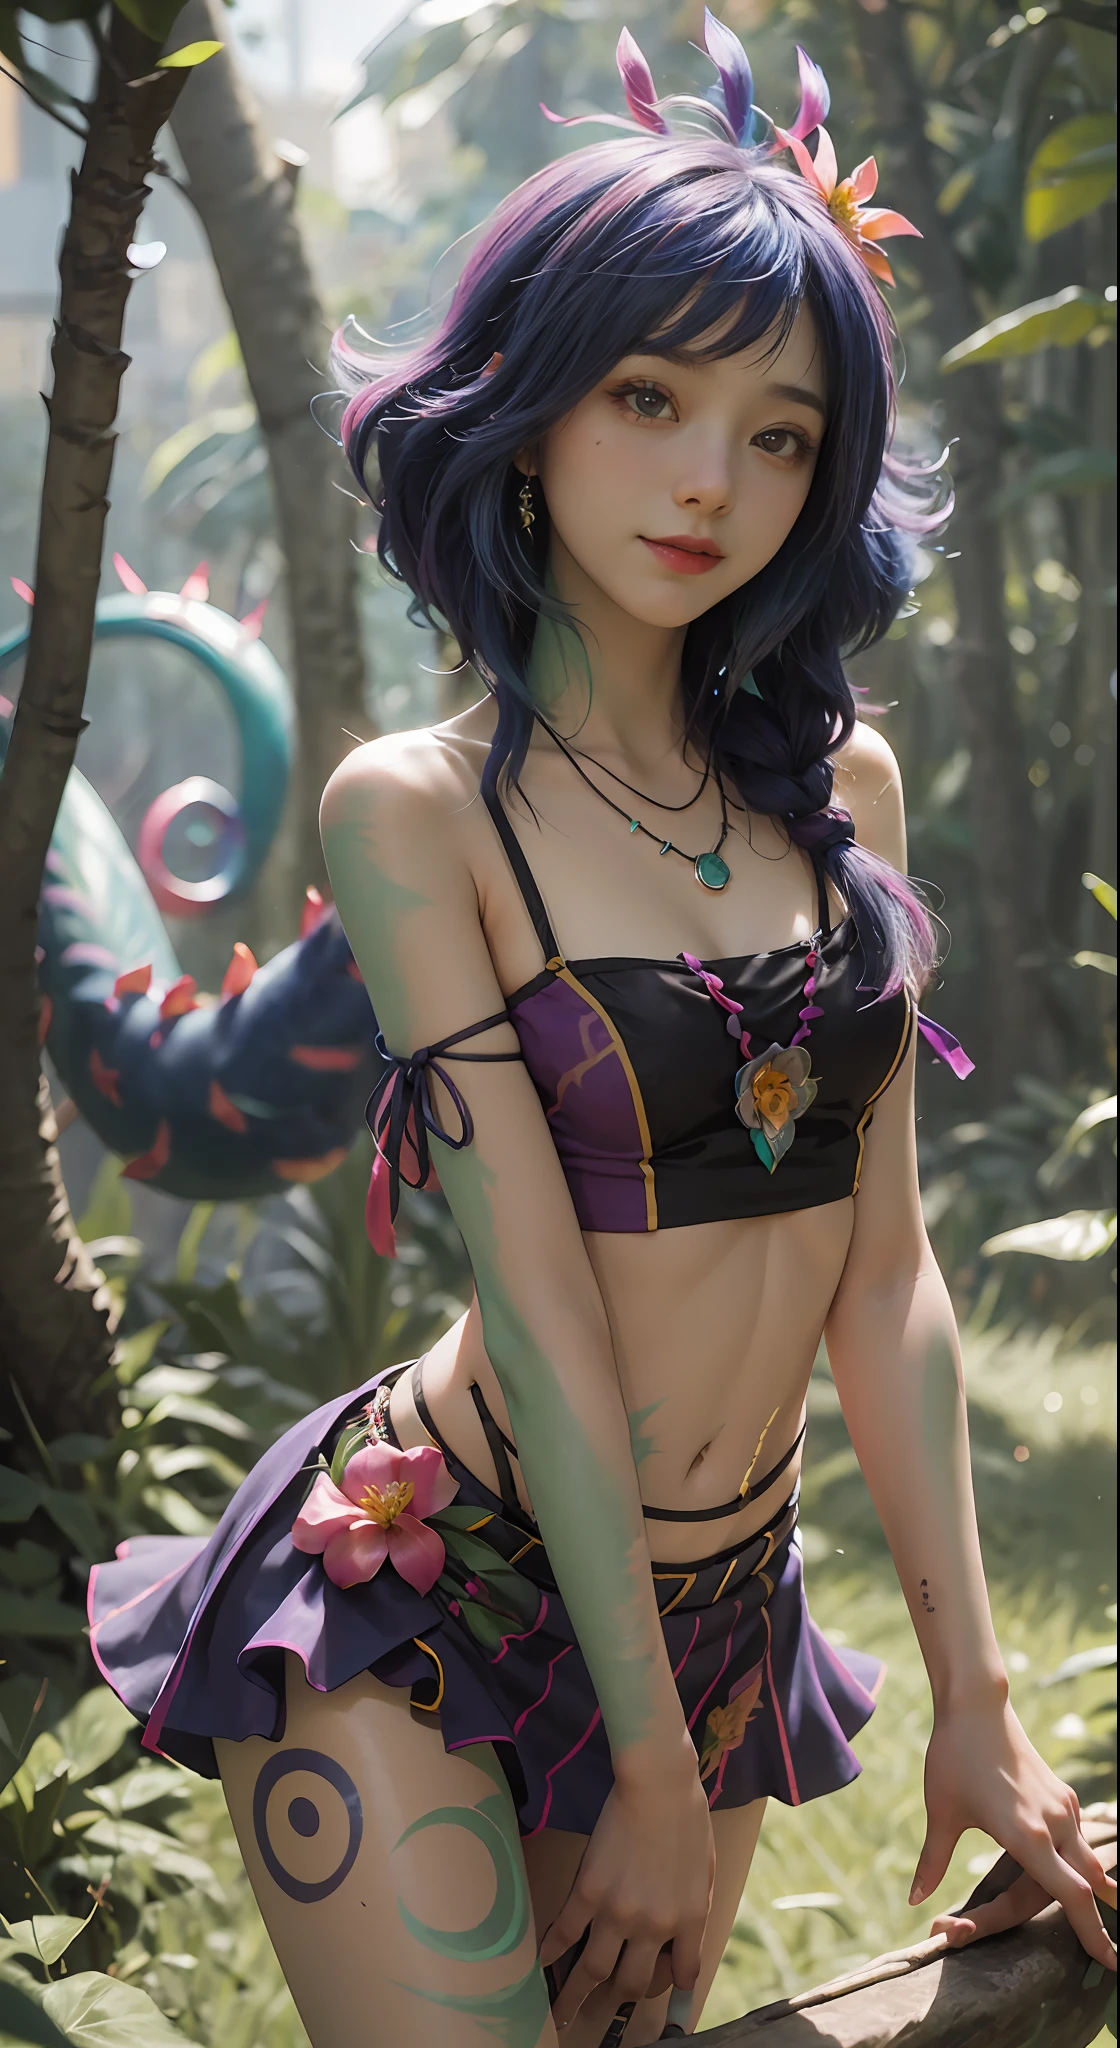 best illustration, illustration, bright colors, masterpiece, best quality, ridiculous, night, jungle, blurred background, 1 girl, beautiful face, blue and purple hair, detailed eyes, looking at the audience, opposite, sexy, crawling on grass, front, full body, neeko, face markers, hair accessory, flower hair, necklace, lizard tail, multicolored skin, body painting, short skirt, opal color, smile, side light, movie lighting, nvidia rendering